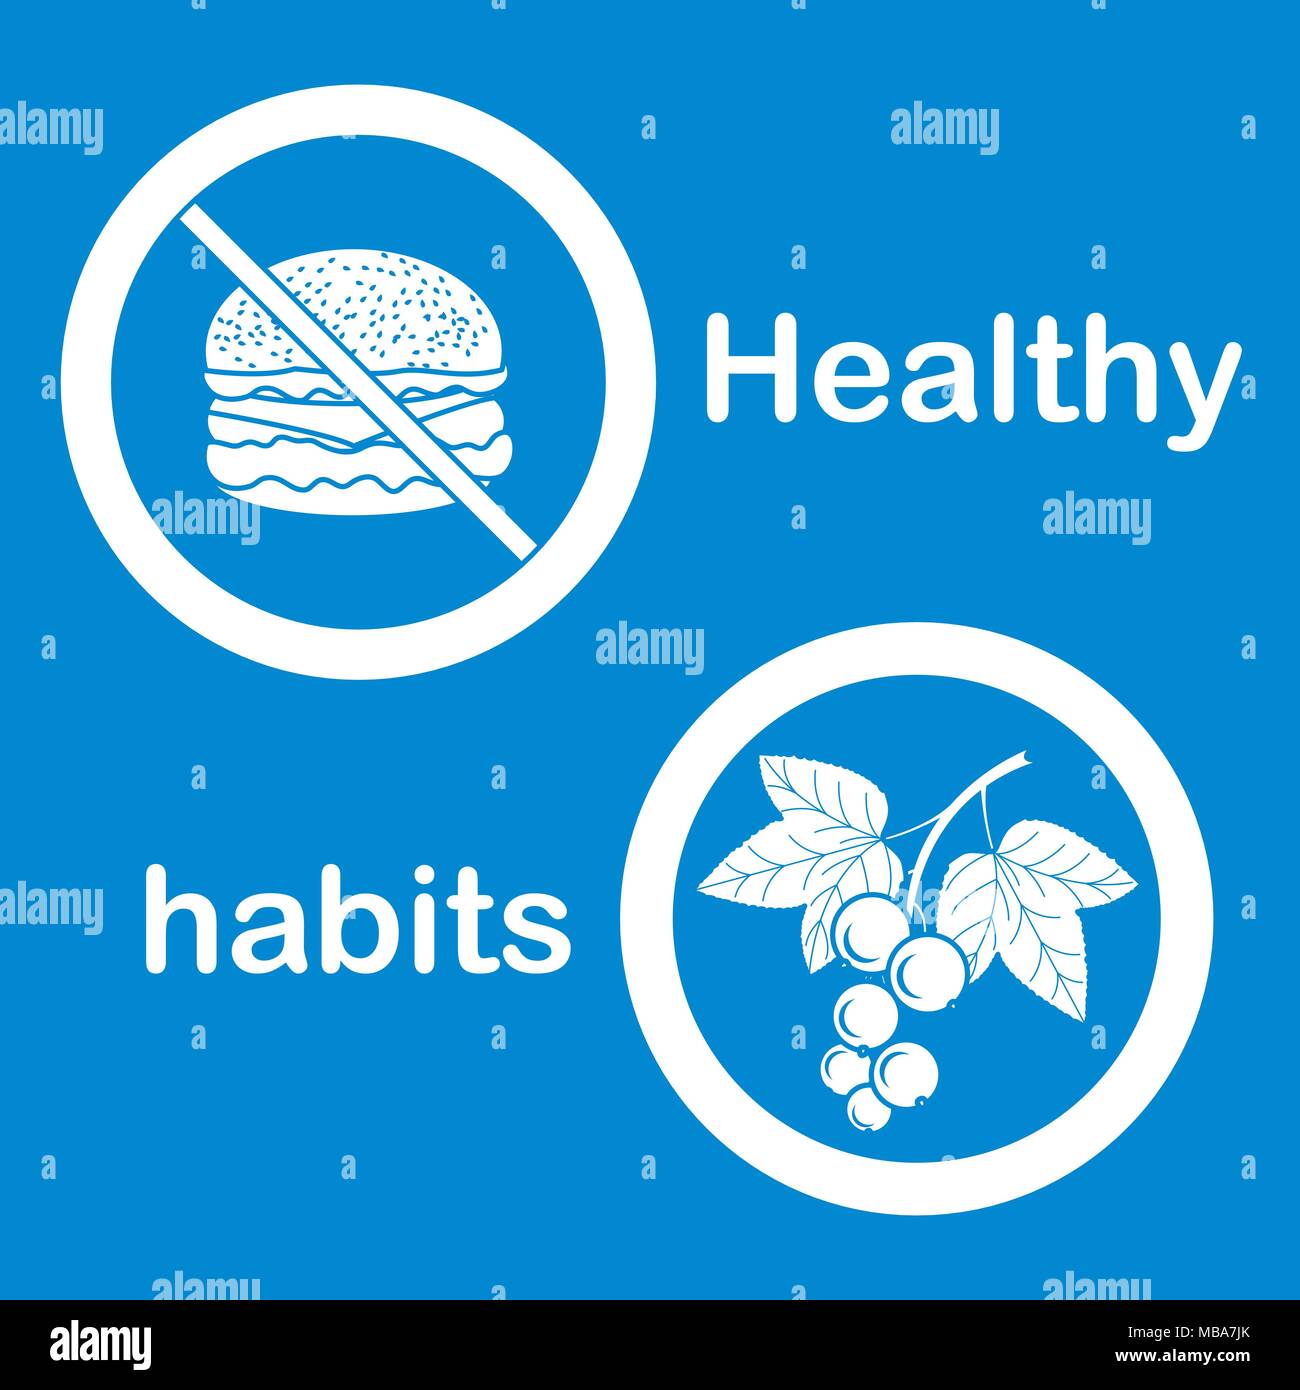 Useful and harmful food. Proper nutrition with excess weight and obesity. Cheeseburger and black currant. Stock Vector